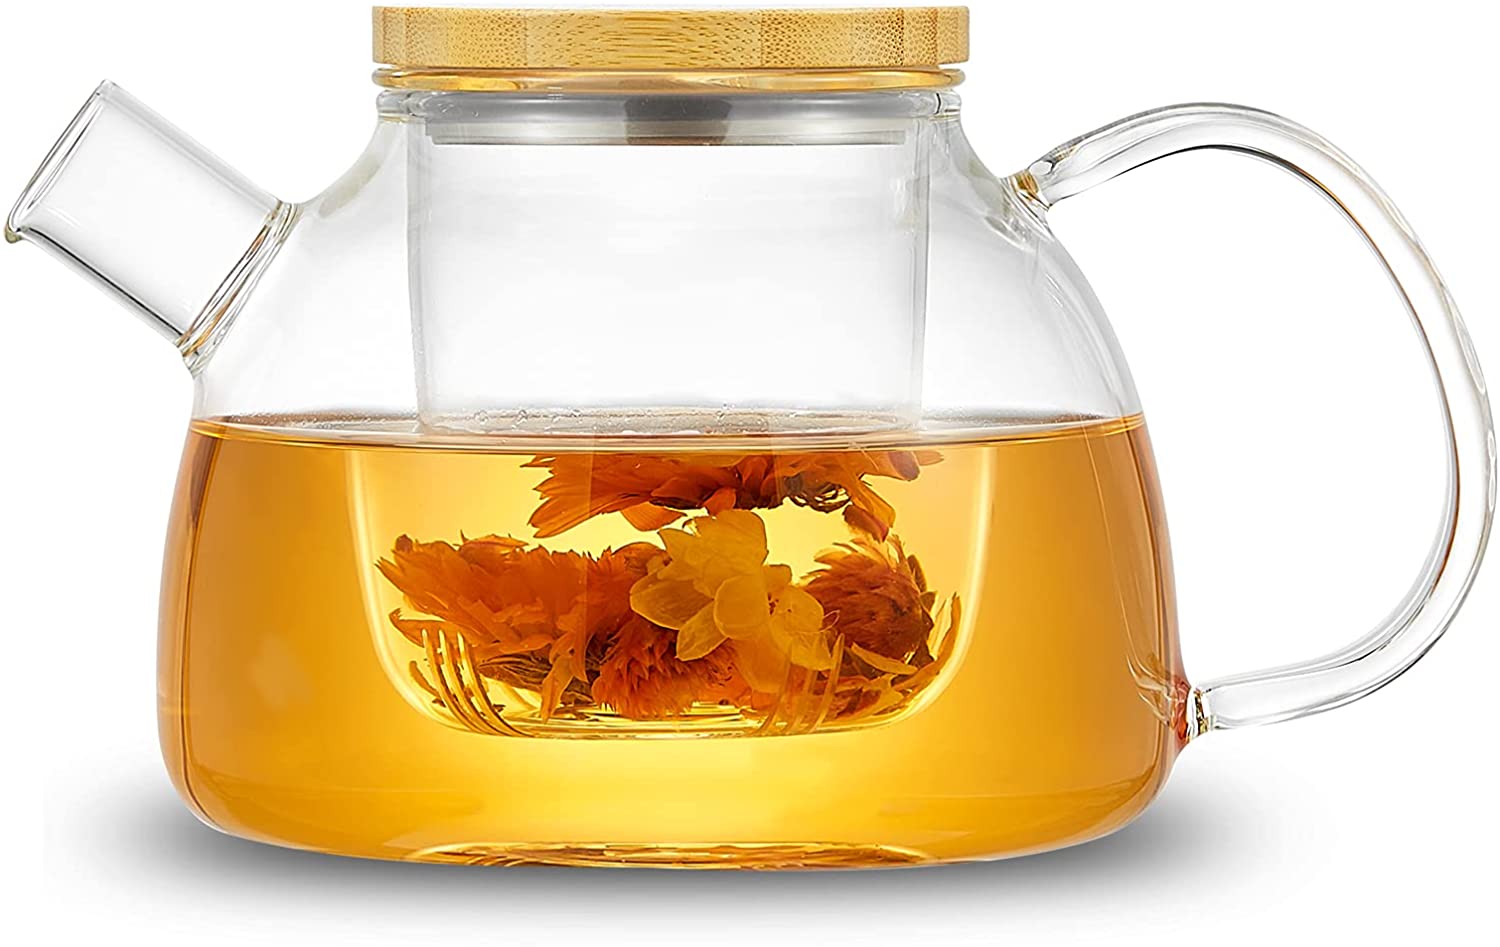 Small Glass Teapot with Infuser for Loose Tea :: Teasenz